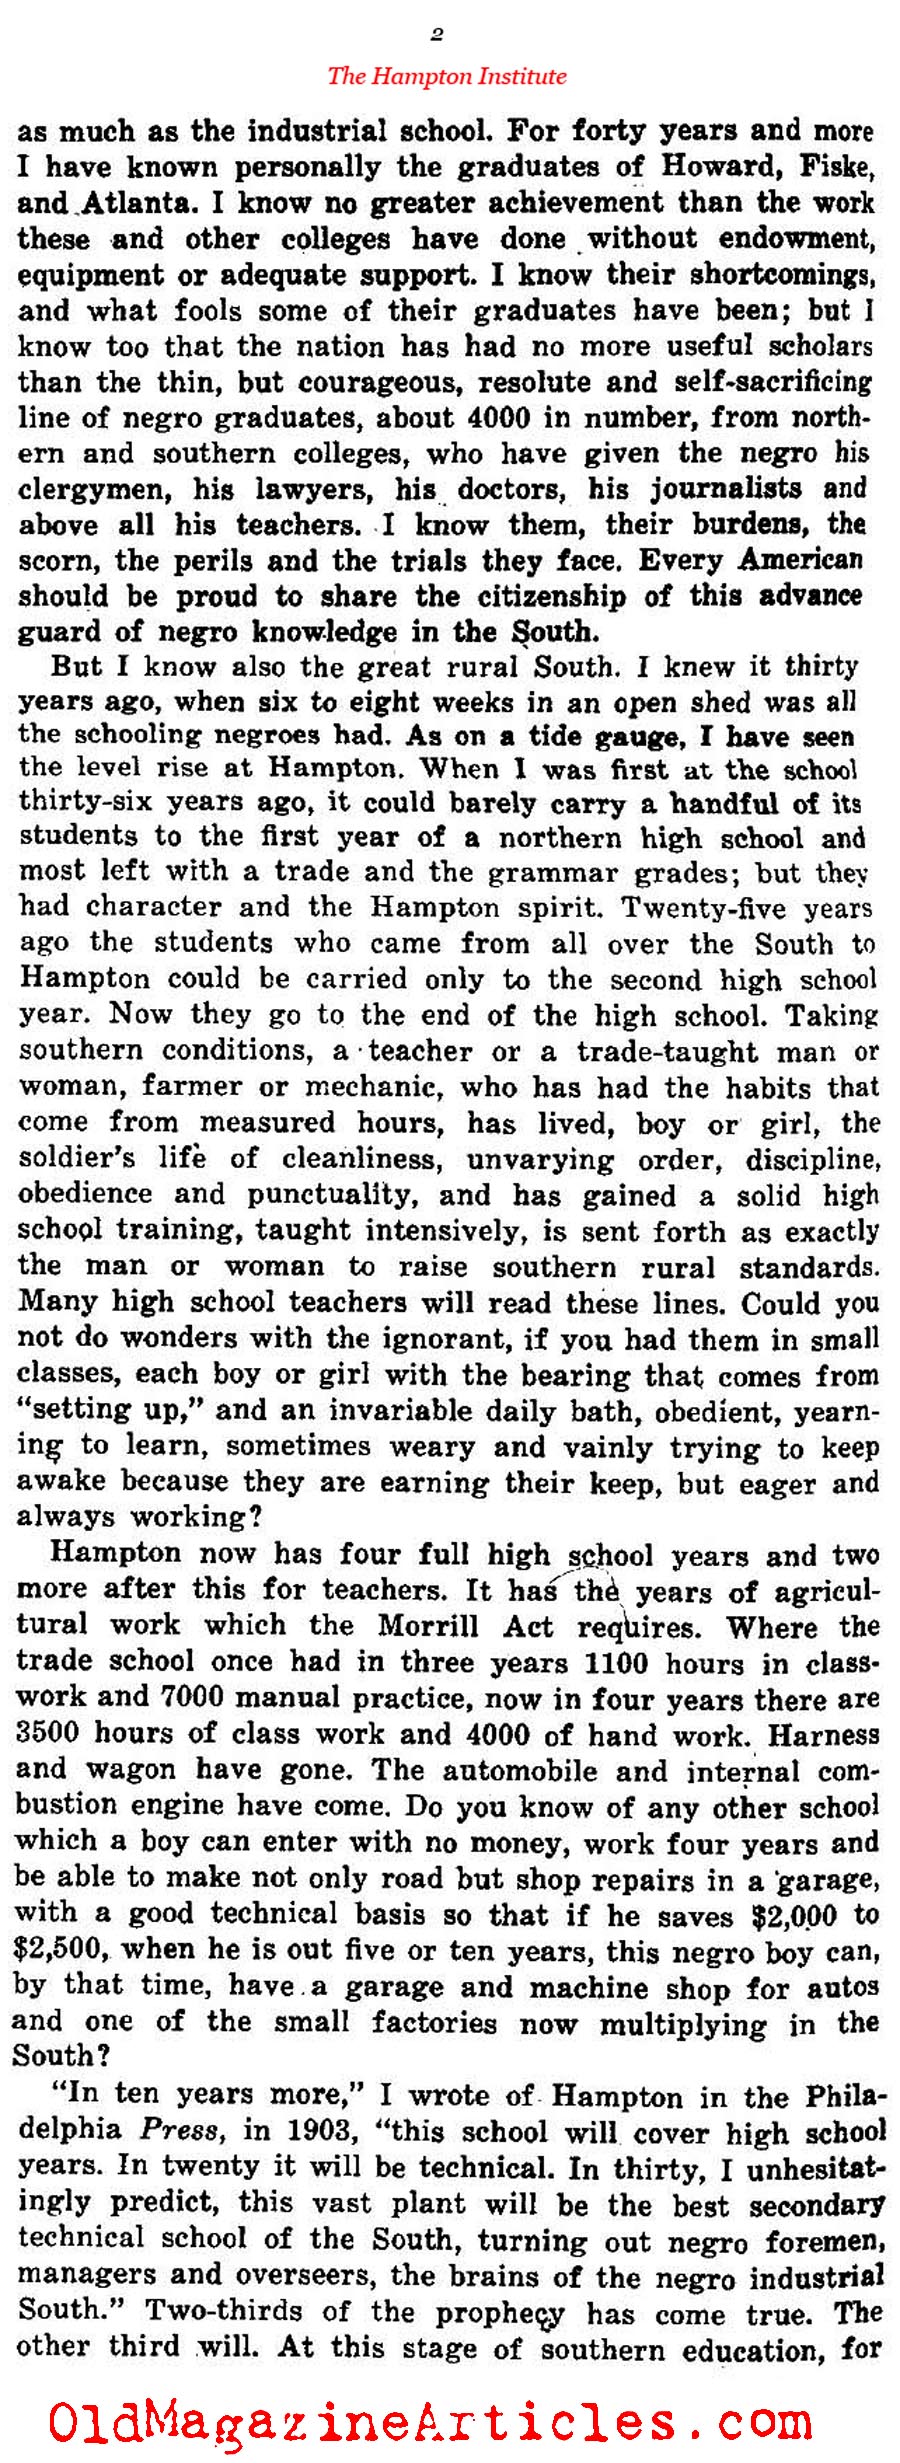 Educating the Negro (The Independent, 1921)